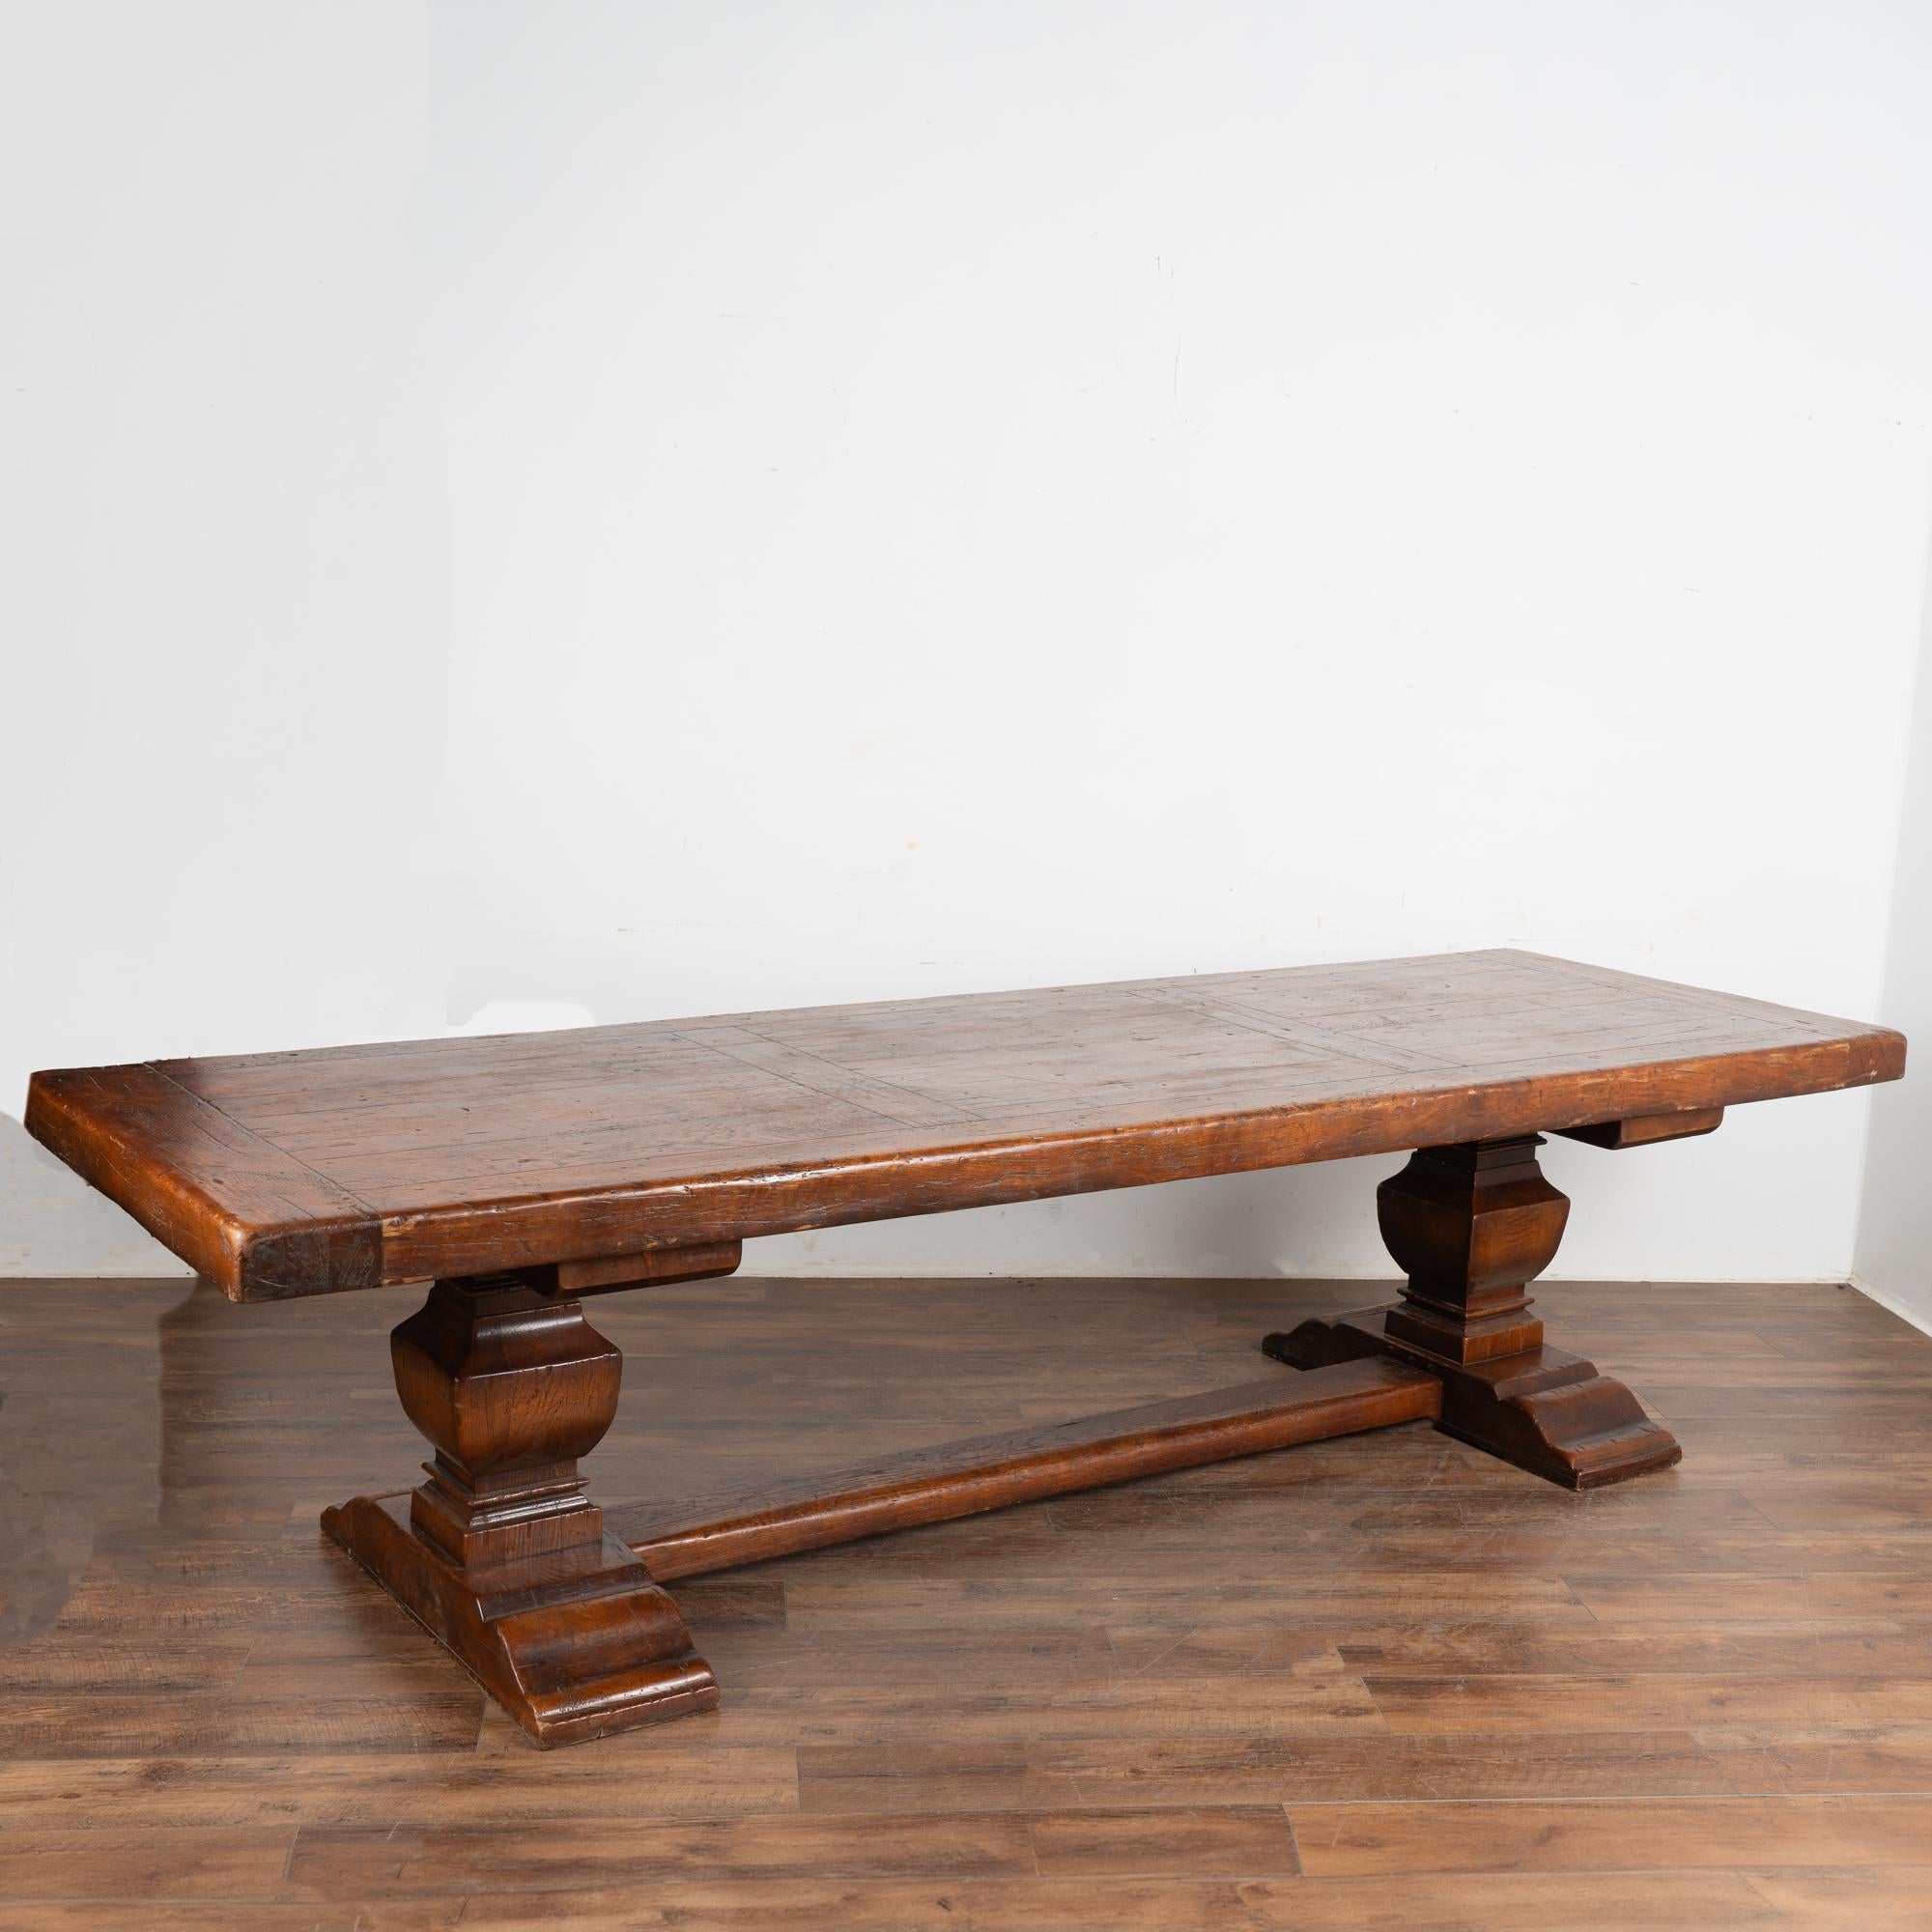 Impressive in size at just under 10' long, this dramatic dining table will make a grand gathering place in today's modern home.
The heavy oak top is impressive; rich character is revealed in the scratches, nicks, and distress which create the appeal